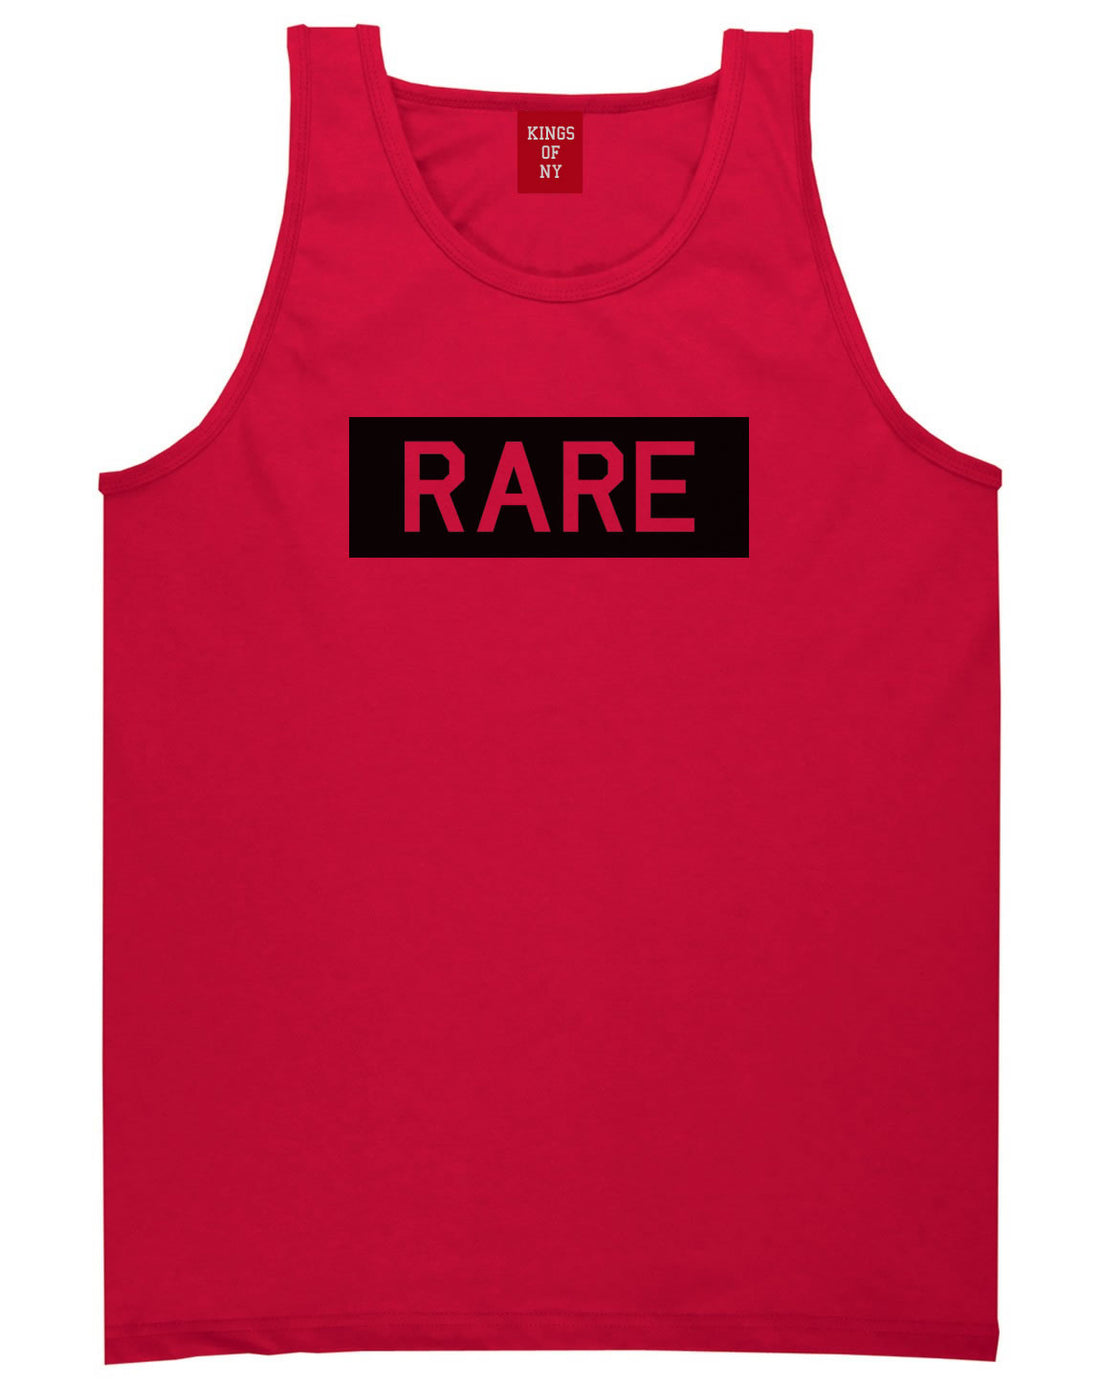 Rare College Block Tank Top in Red by Kings Of NY